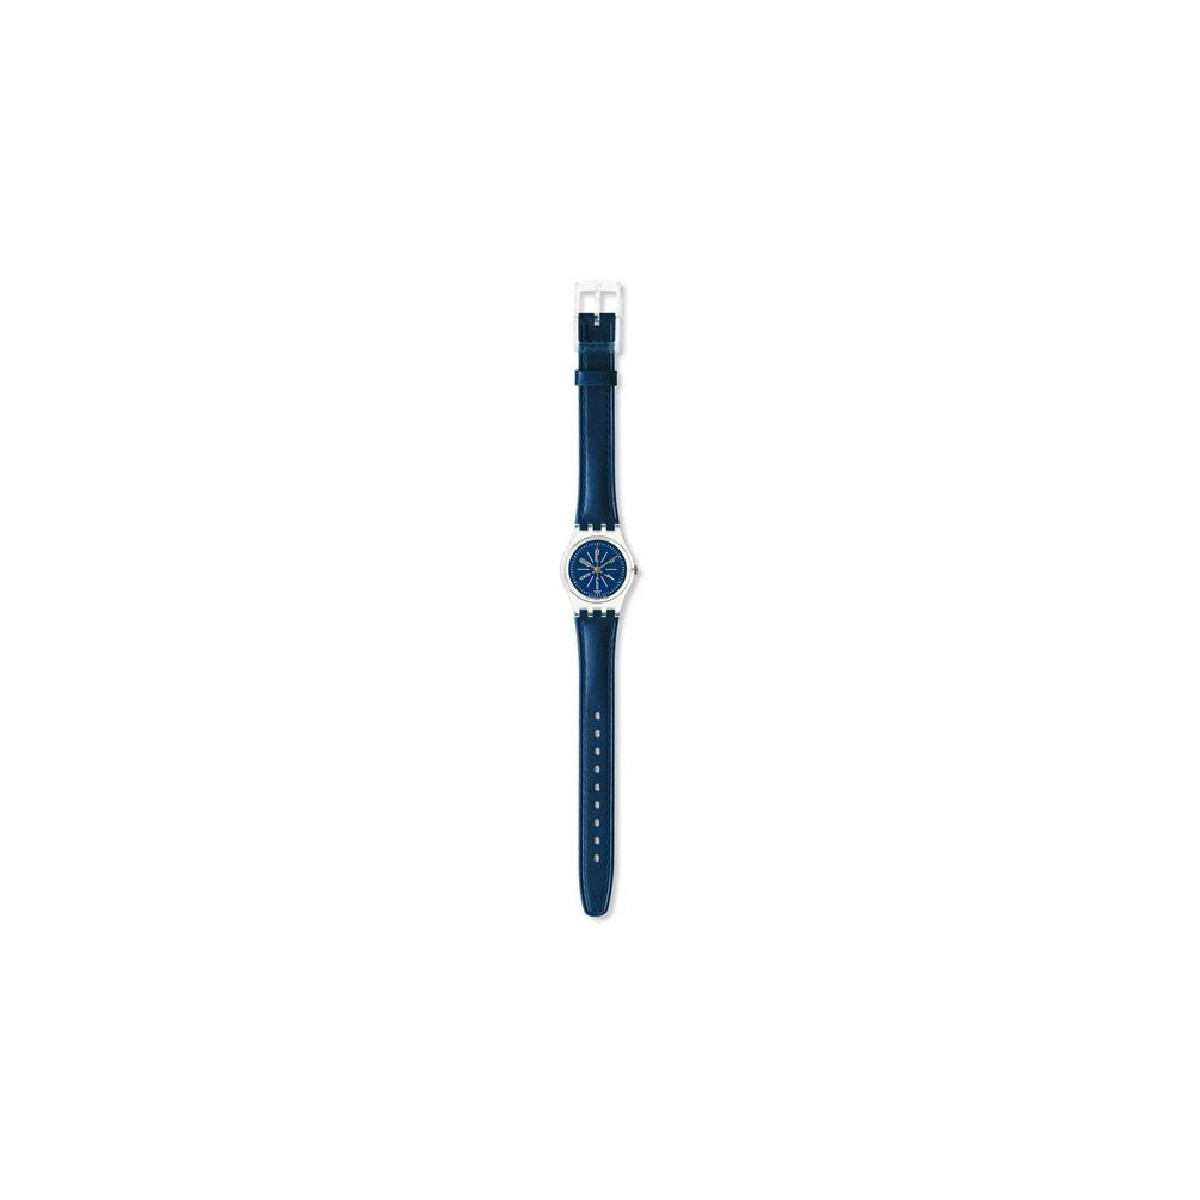 swatch_lk214_outlet_50%